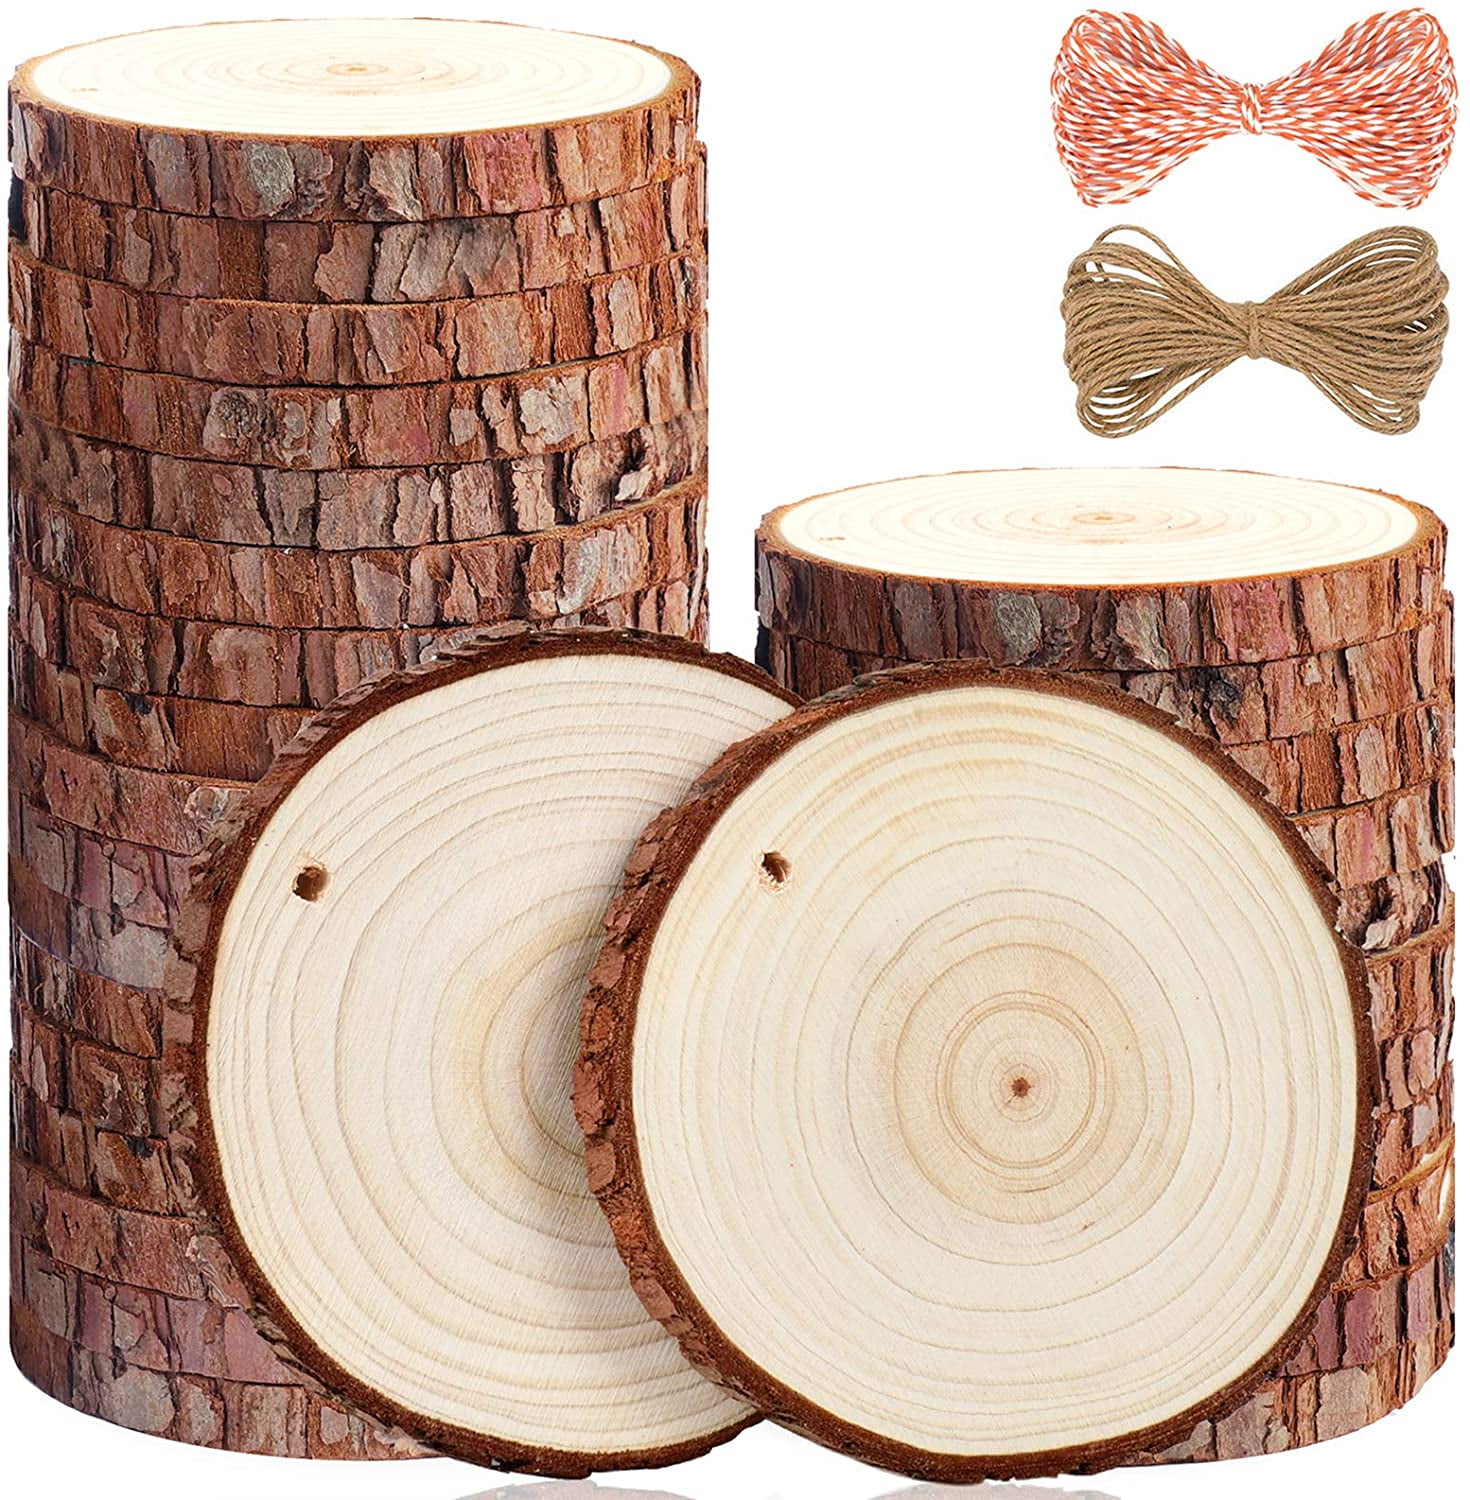 Natural Wood Slices 12 Pcs 3.5-4 Inch Wood Rounds for Crafts